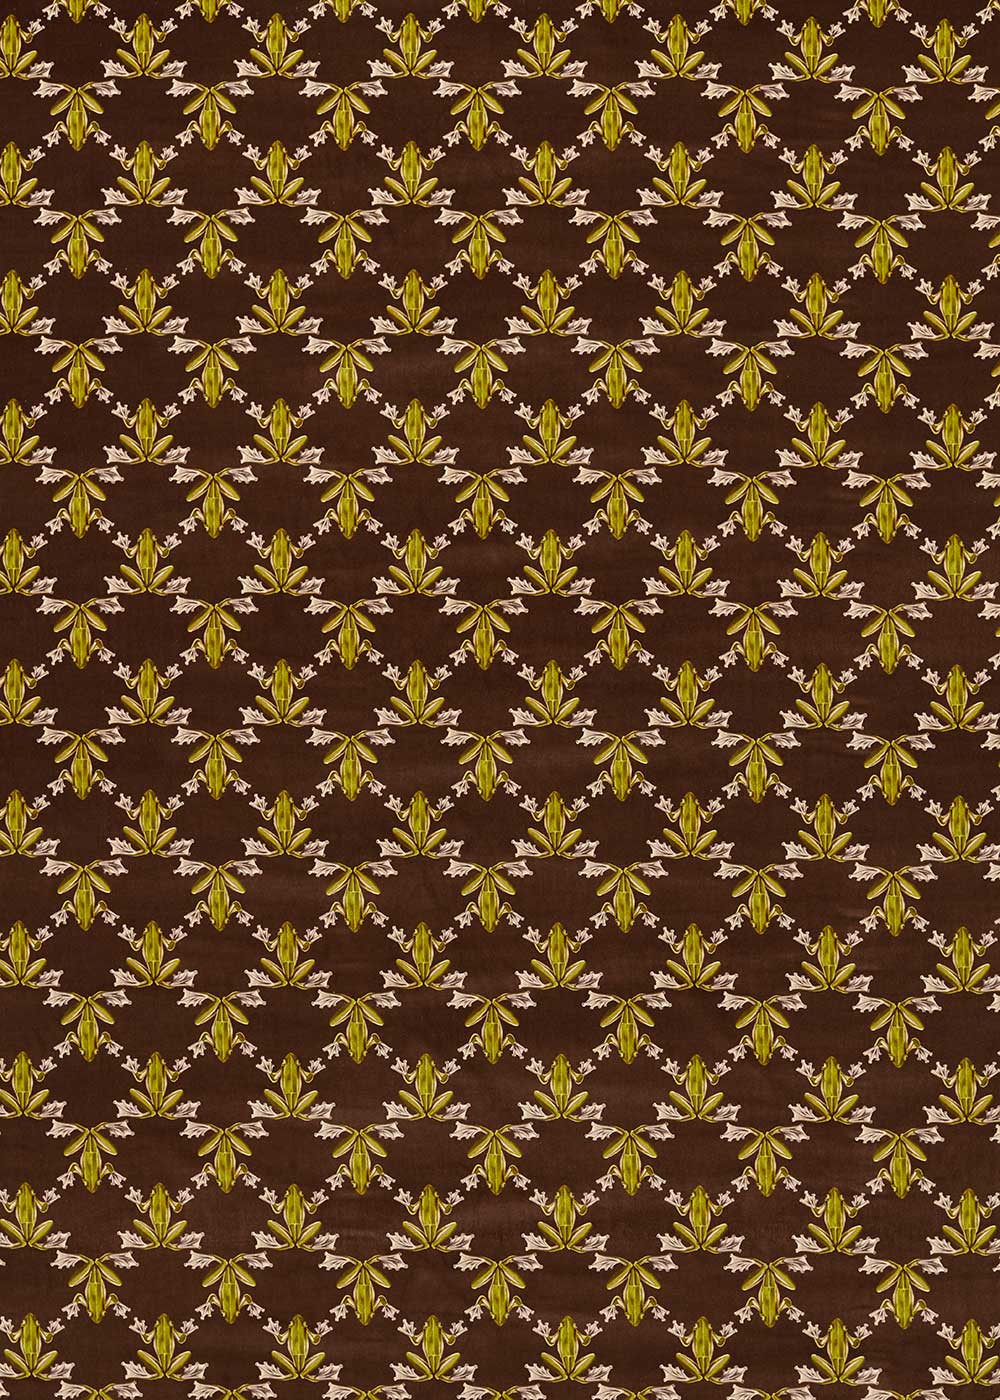 Wood Frog Fabric - Chocolate - by Harlequin